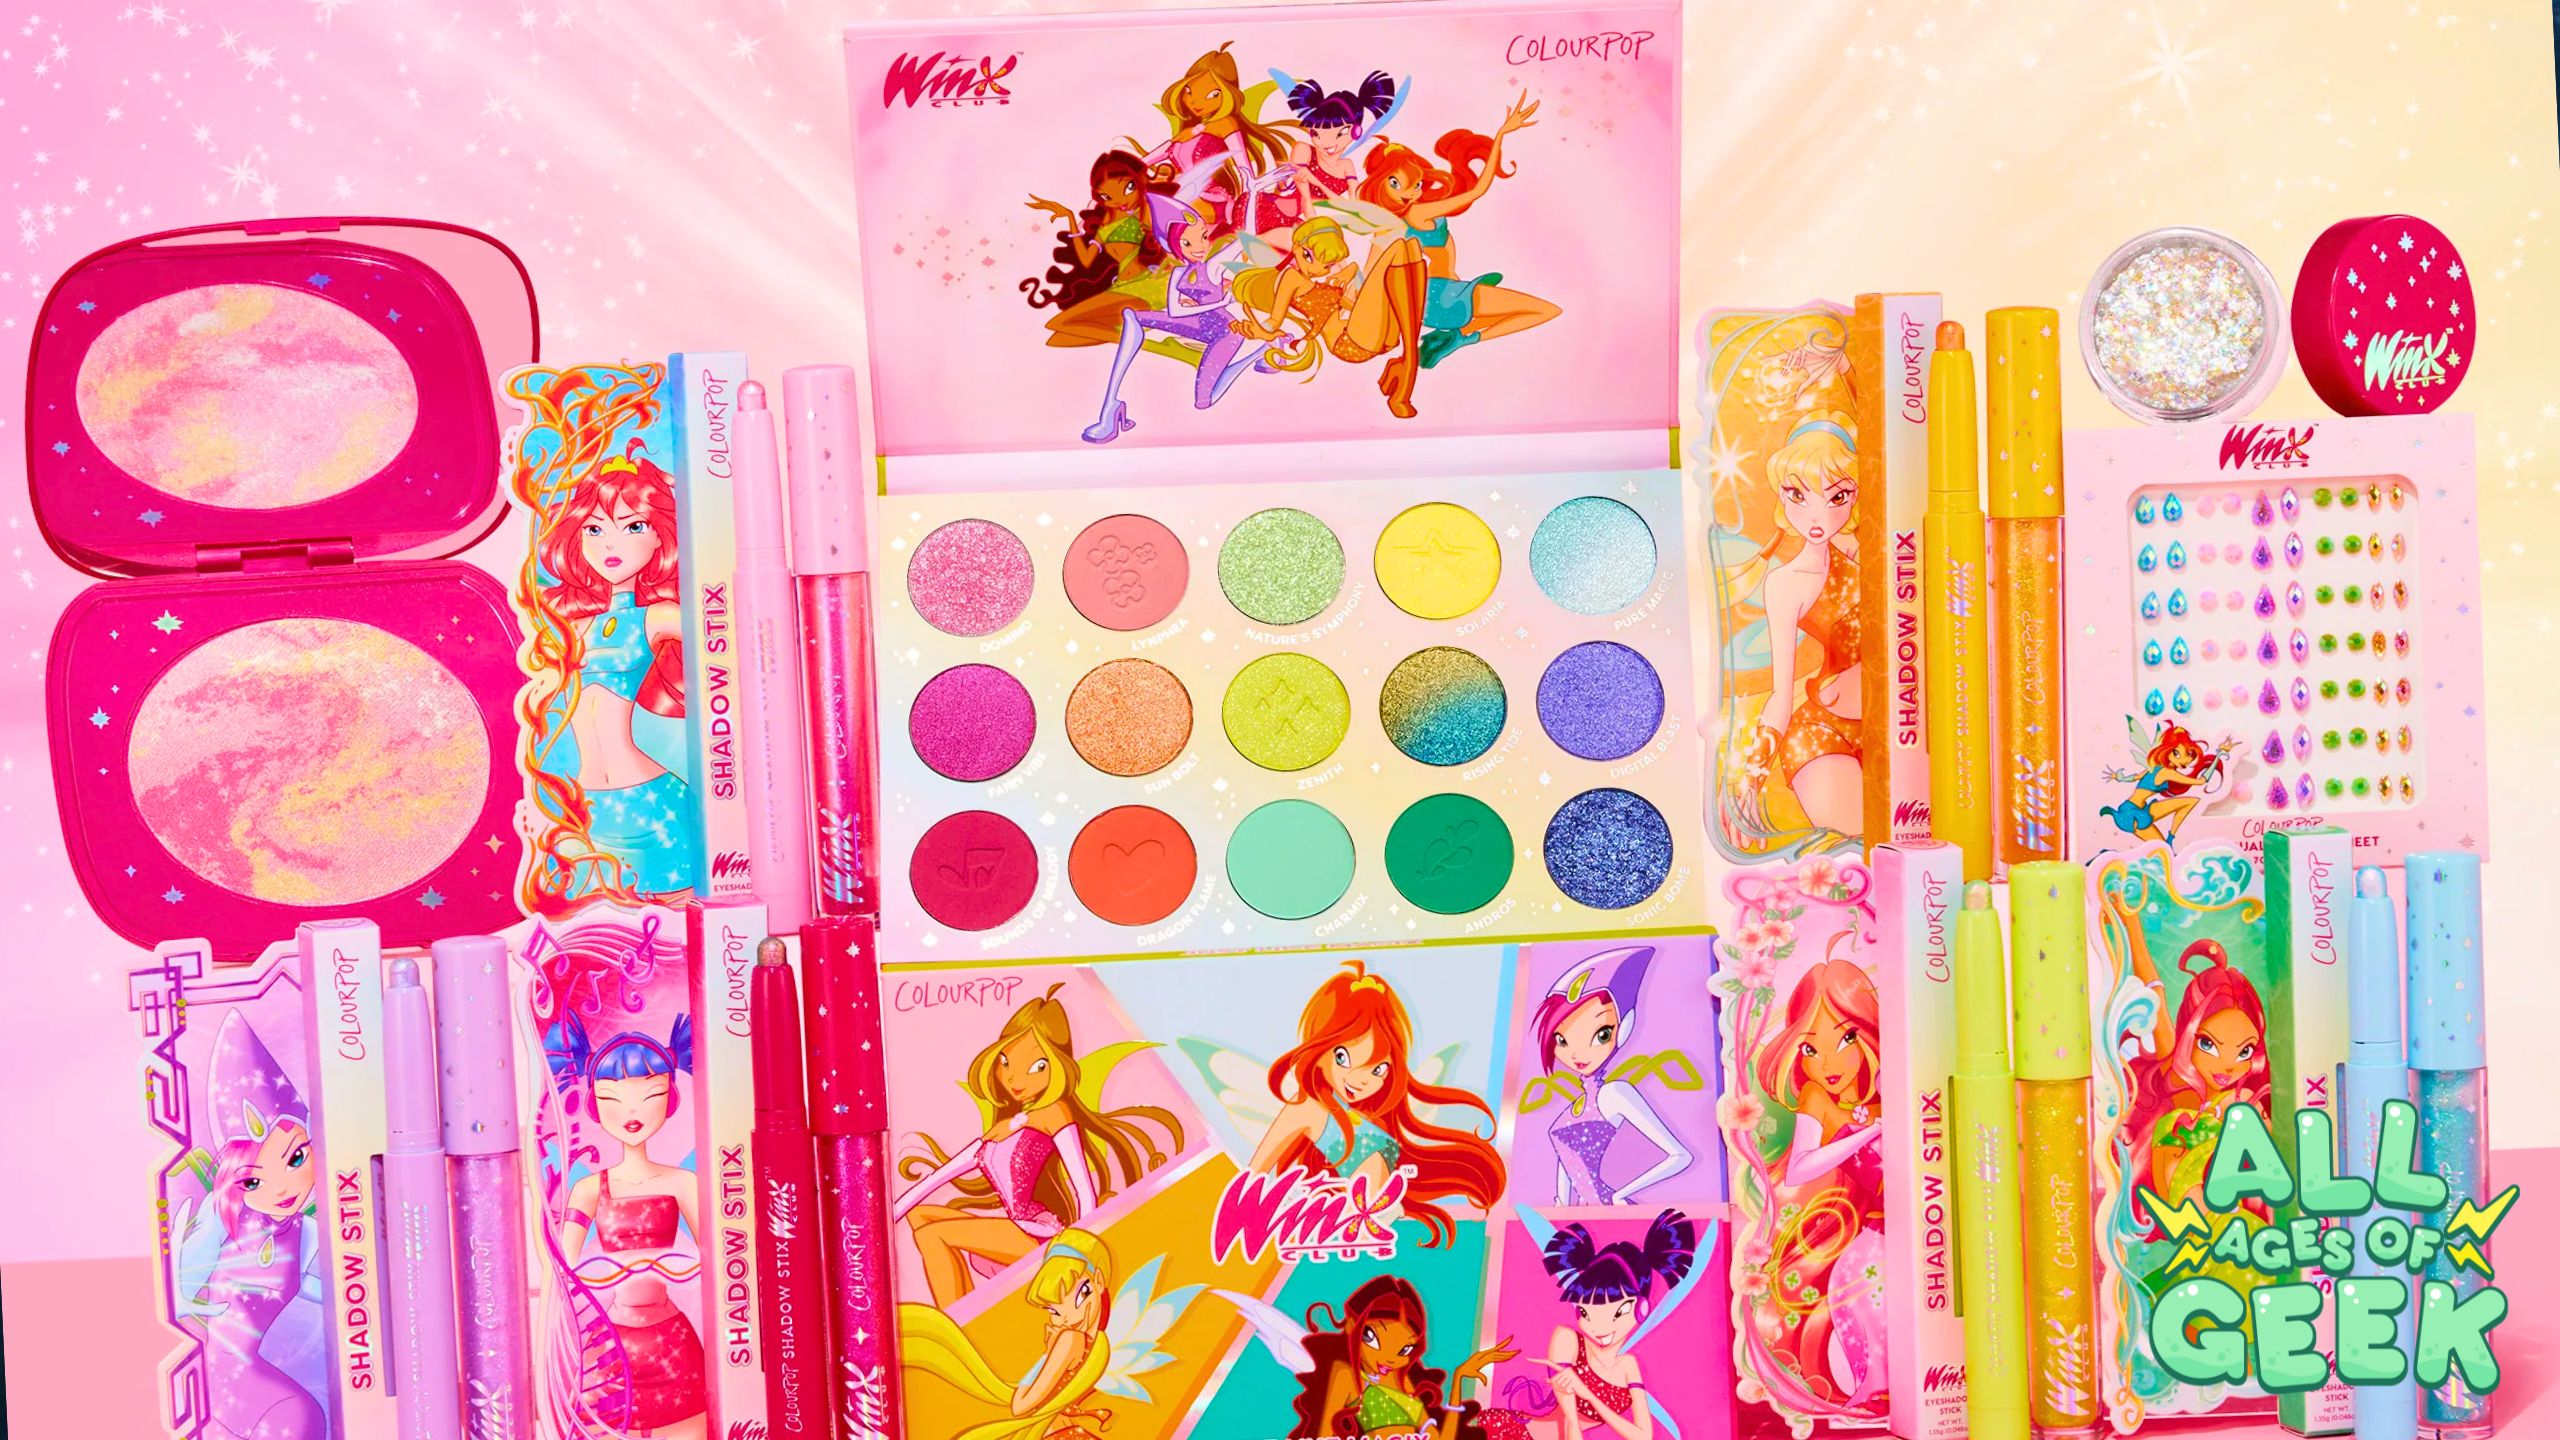 This image showcases a vibrant collection of Winx Club-themed makeup products from ColourPop. The set includes an eyeshadow palette with 15 colorful shades, shadow sticks, lip gloss, face powders, and decorative gems. Each product features illustrations of Winx Club characters, adding a whimsical and nostalgic touch. The background is a pink gradient with sparkles, enhancing the magical theme. The All Ages of Geek logo is prominently displayed in the bottom right corner.